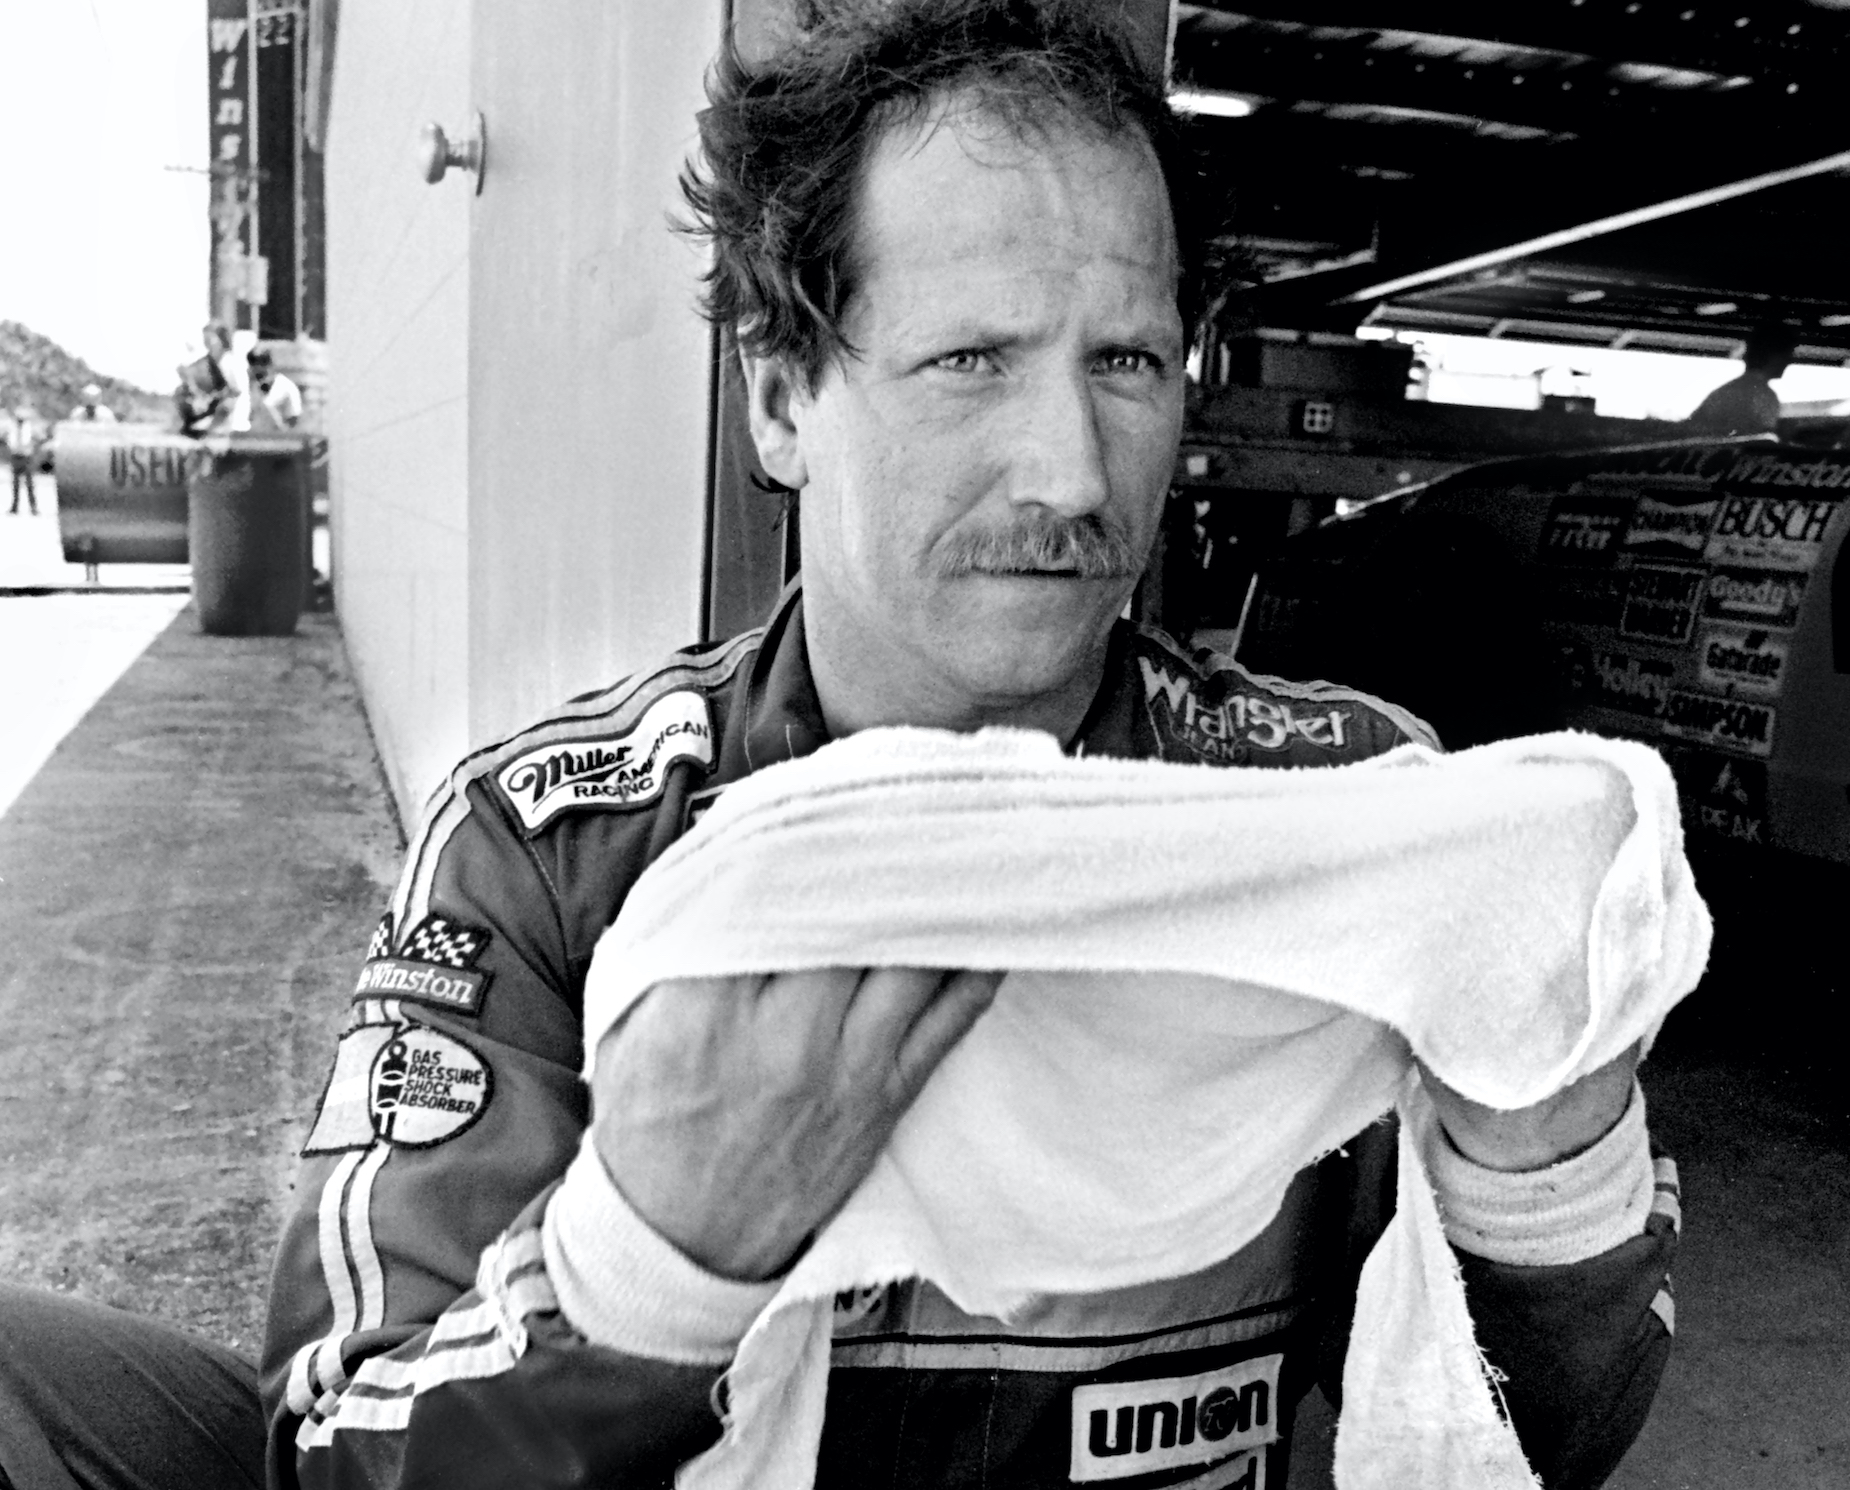 Dale Earnhardt in the garages at the Daytona International Speedway.